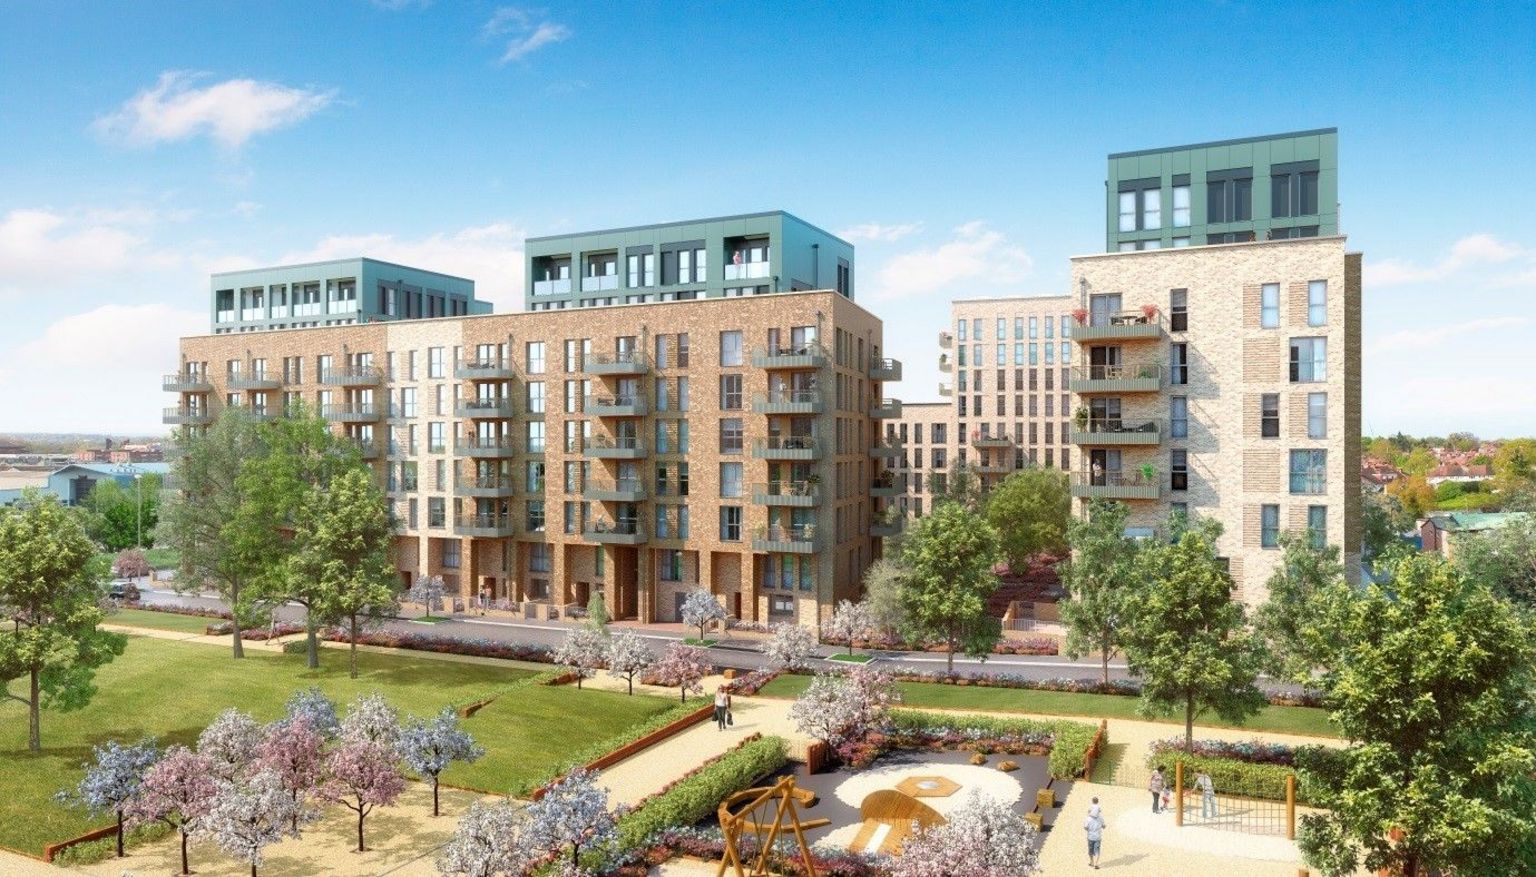 An artist's impression of how the new development, Acton Gardens, will look